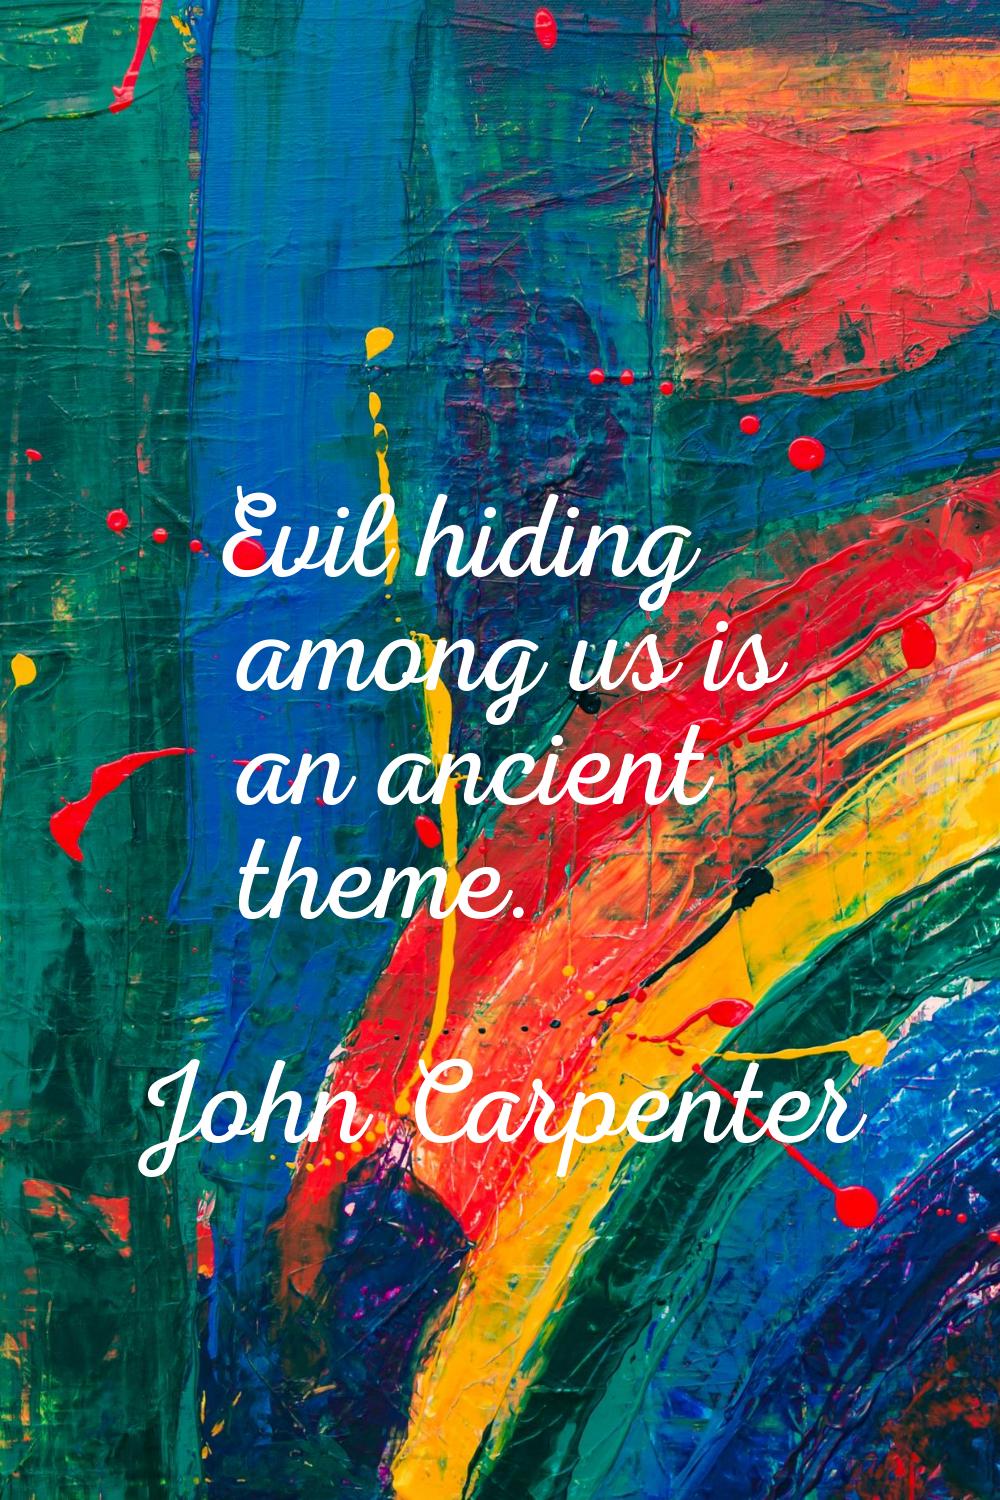 Evil hiding among us is an ancient theme.